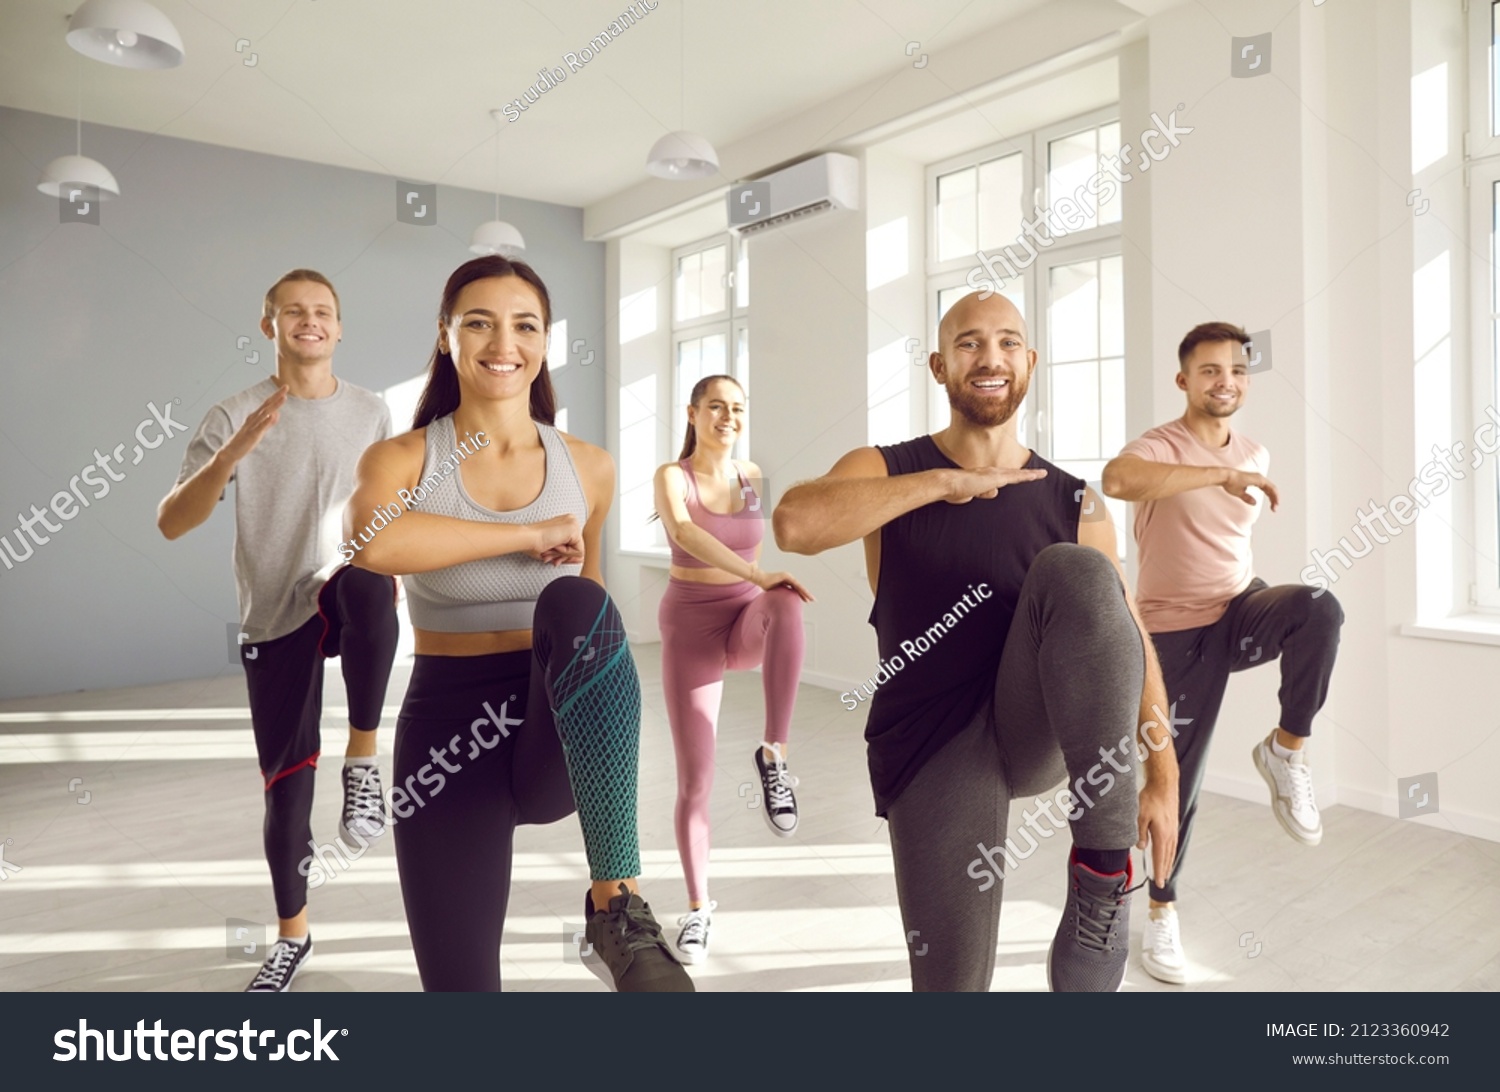 Group of young sporty people doing exercises together in bright and spacious gym. Happy men and women doing aerobics exercises lifting high knees in gym. Fitness, sport, aerobics and people concept. #2123360942